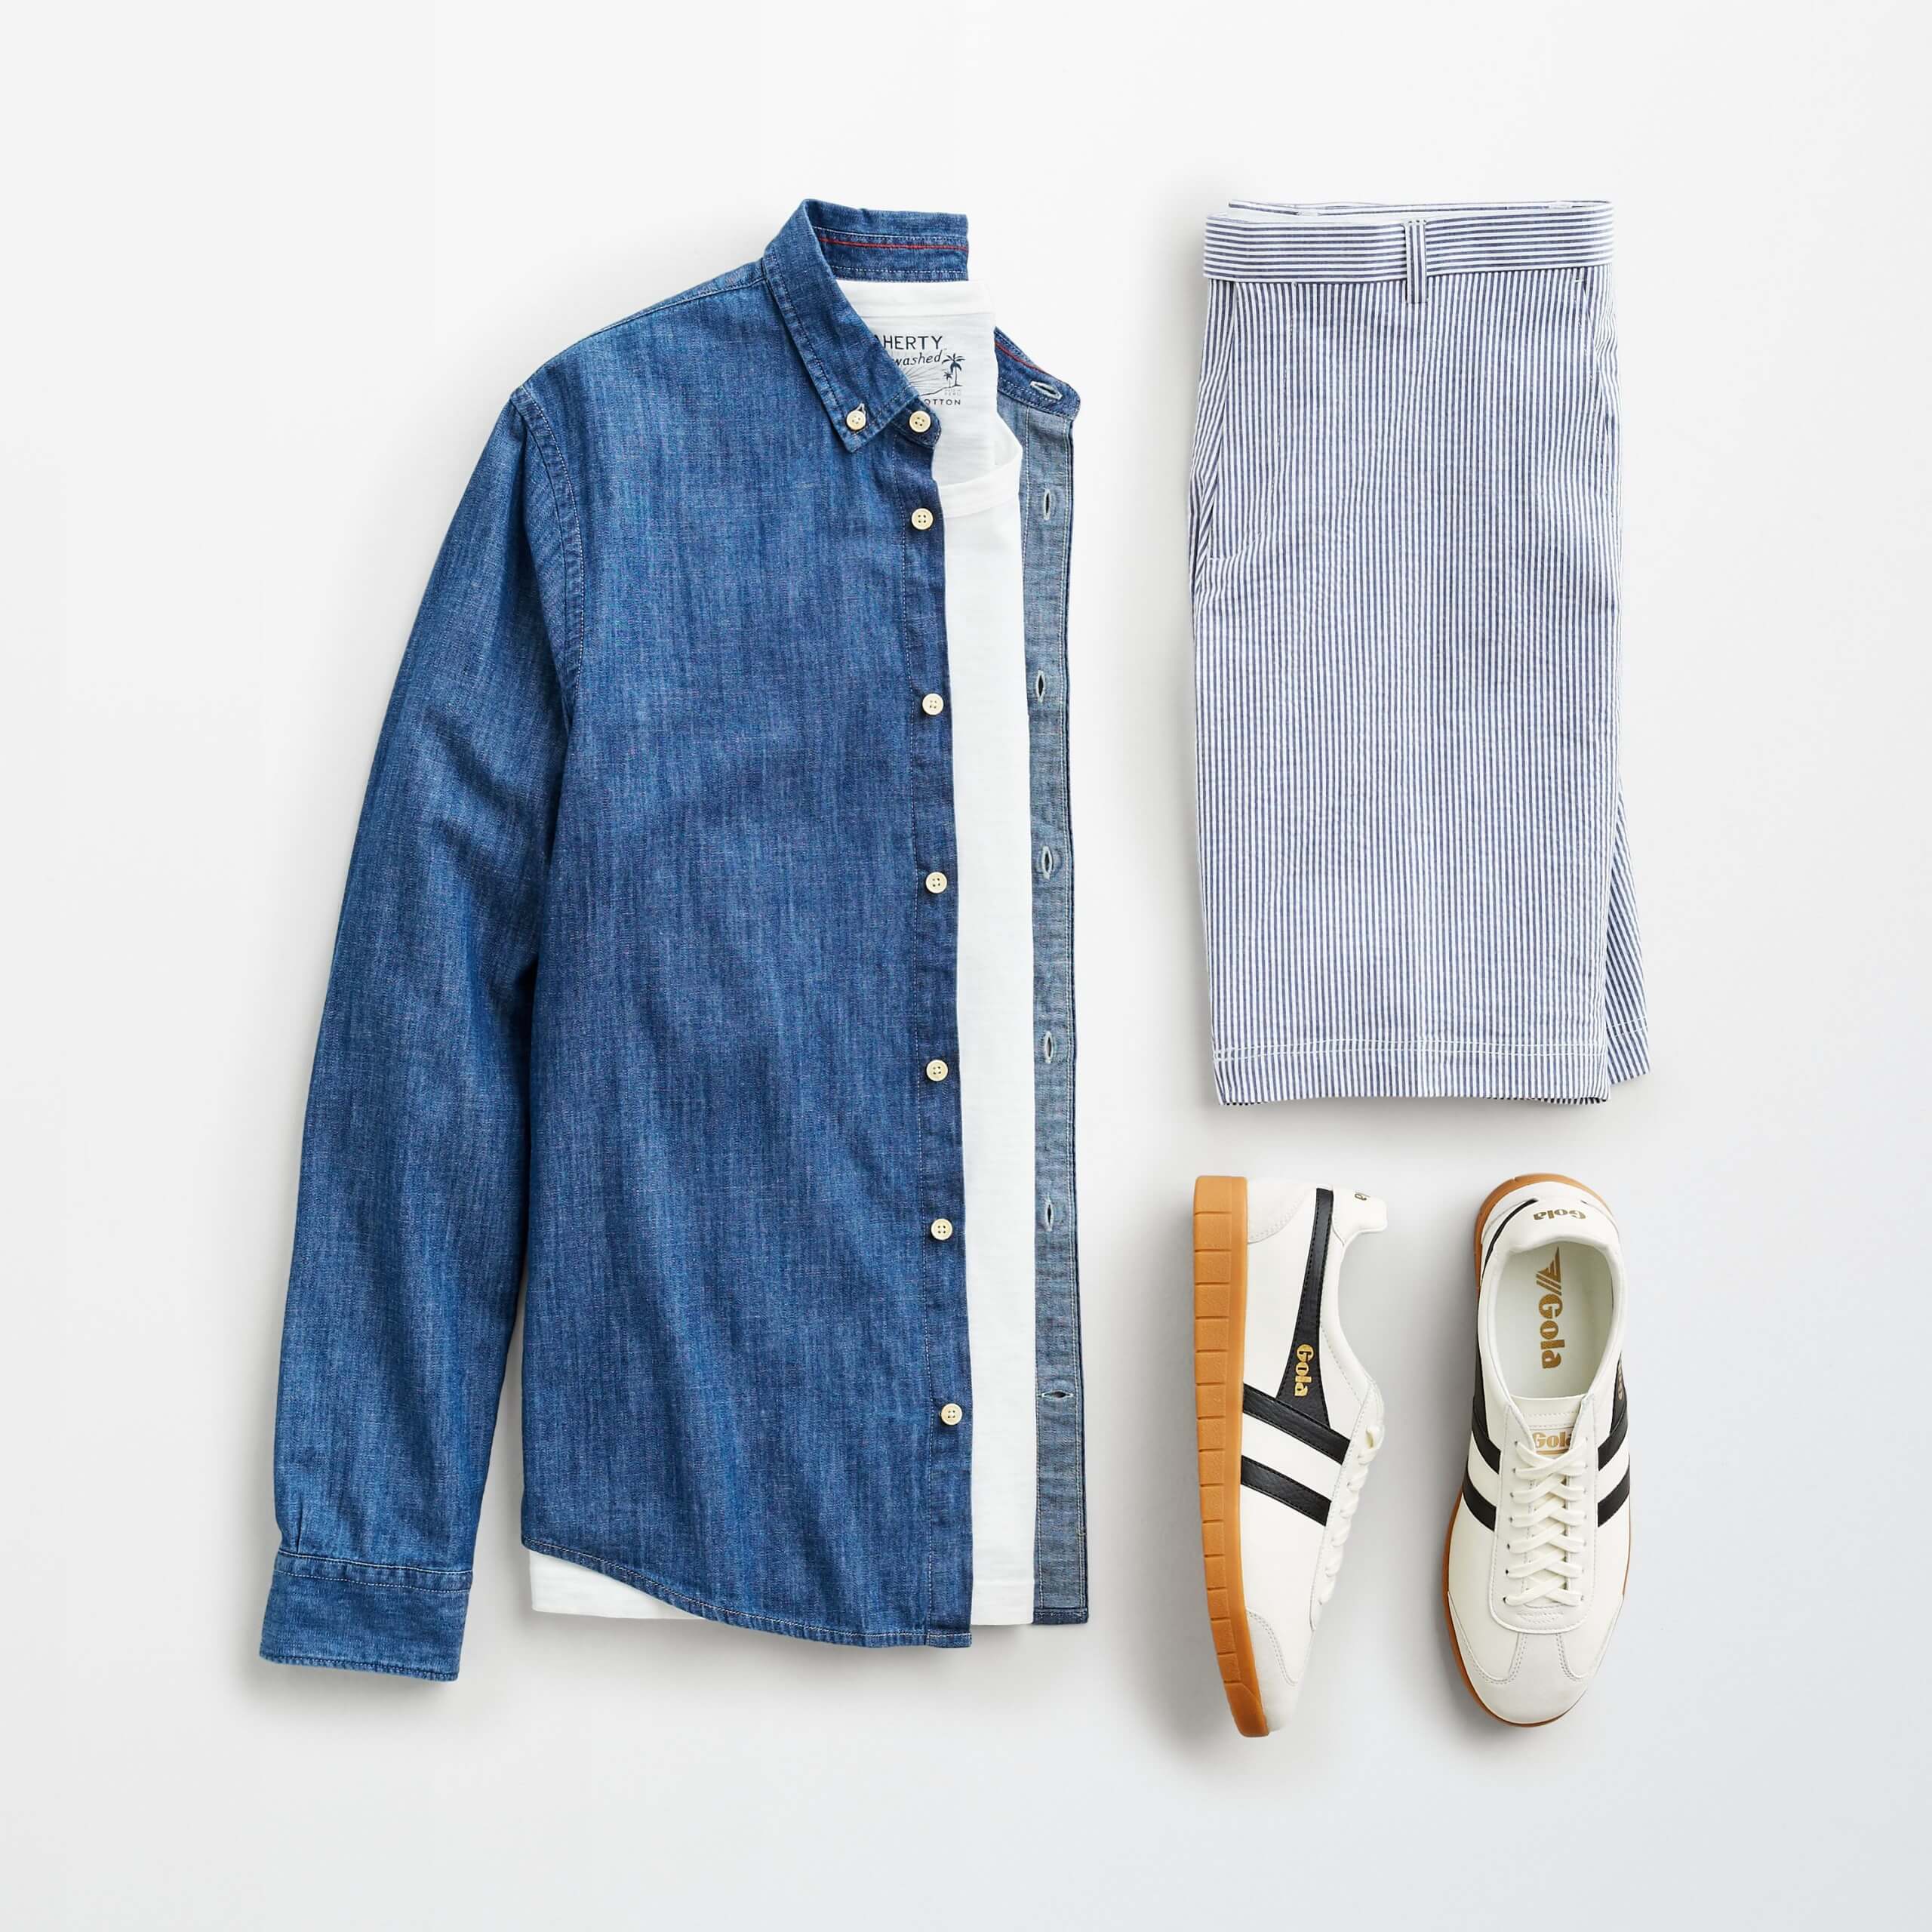 Stitch Fix men’s outfit laydown featuring blue long-sleeve button-down over white shirt, striped shorts and white trainers.